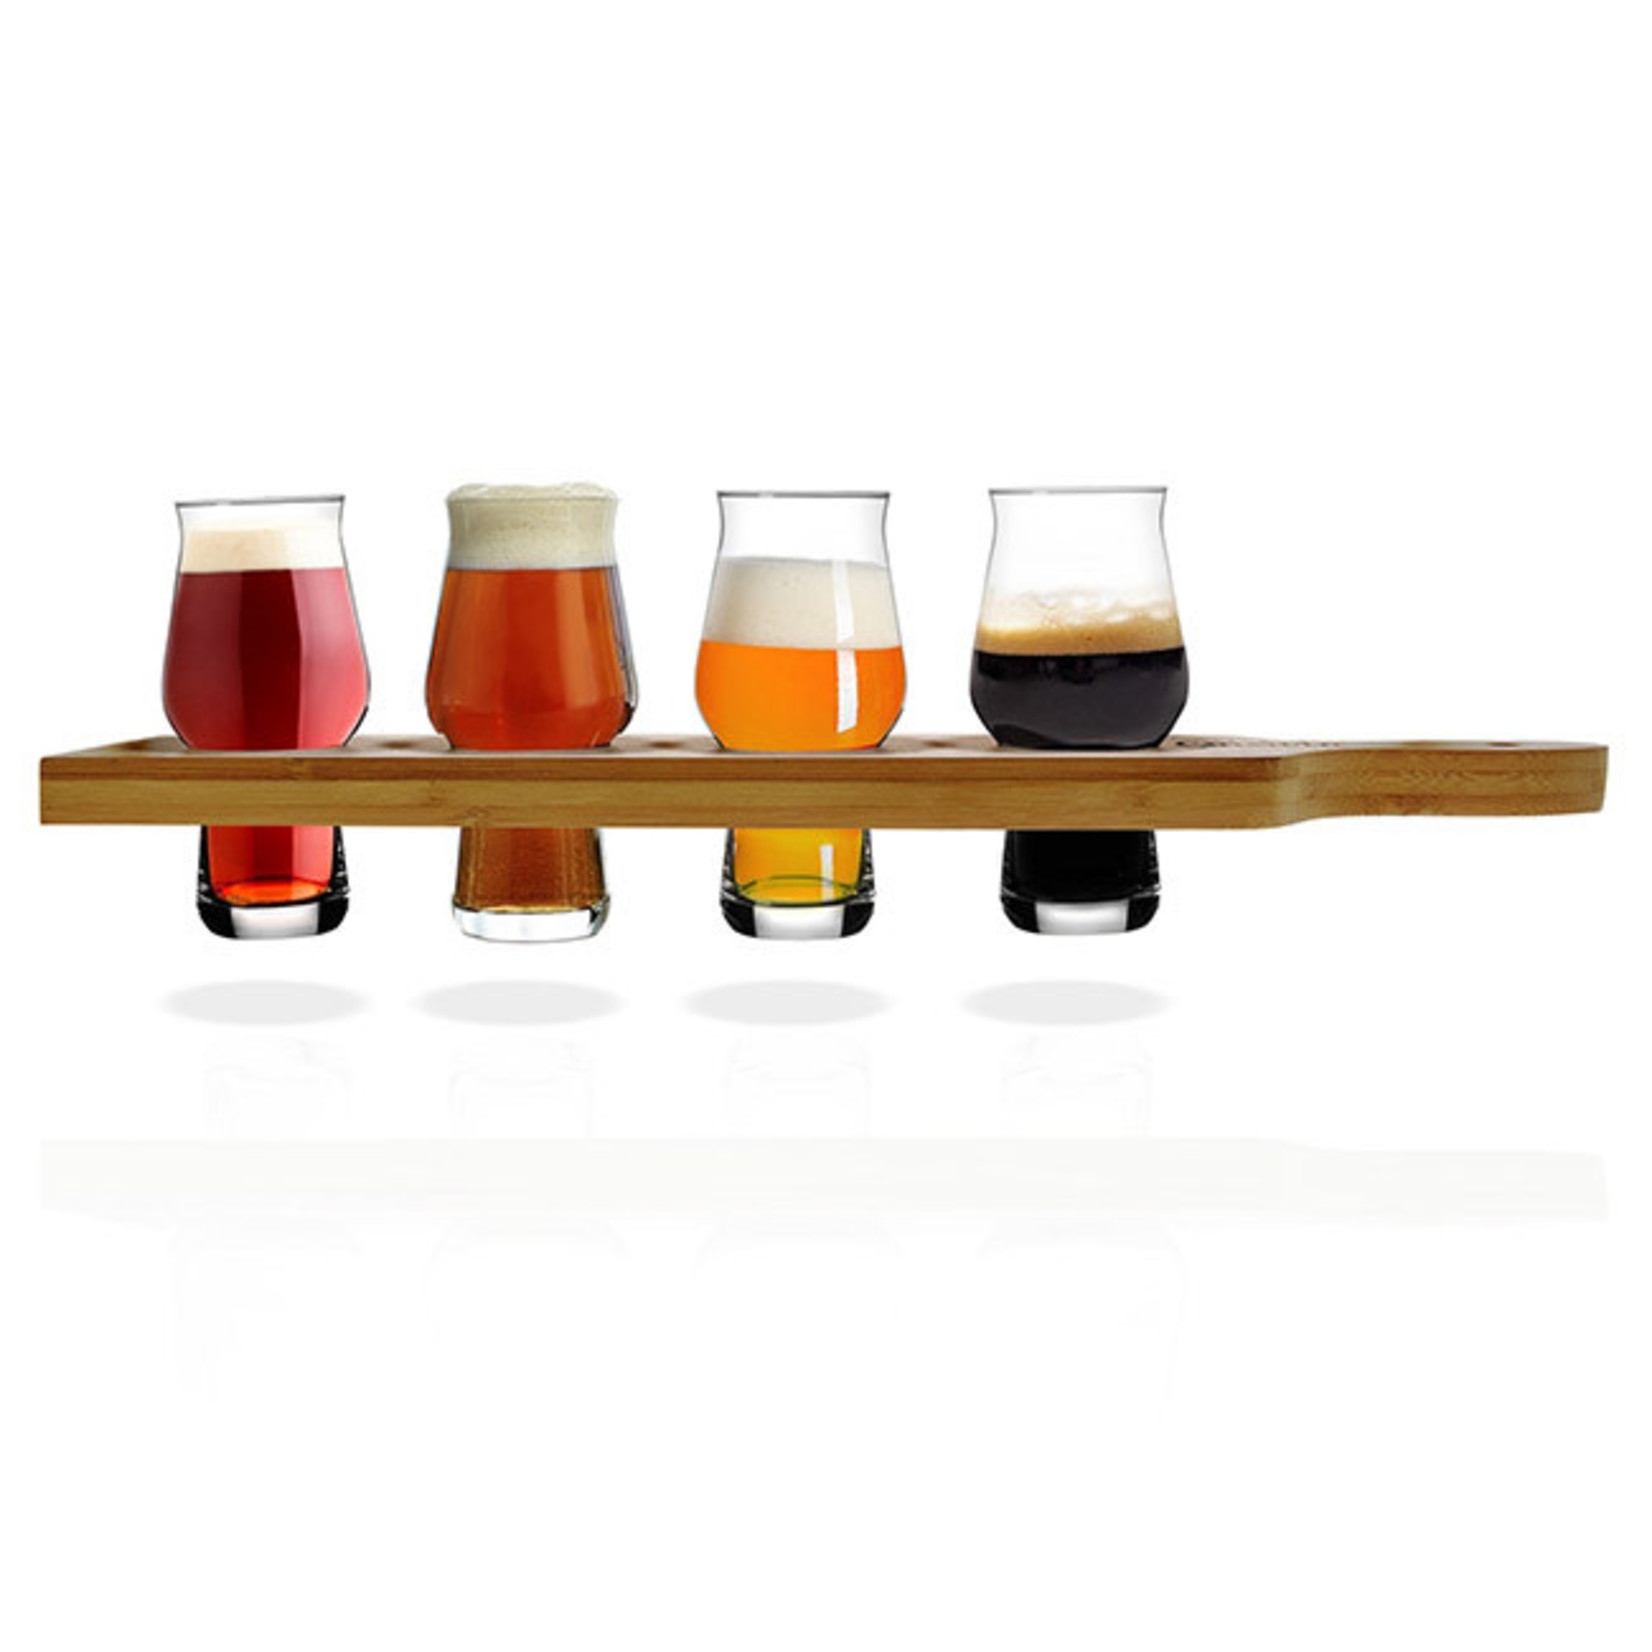 Master Craft Beer Tasting Flight - 4 glasses with paddle